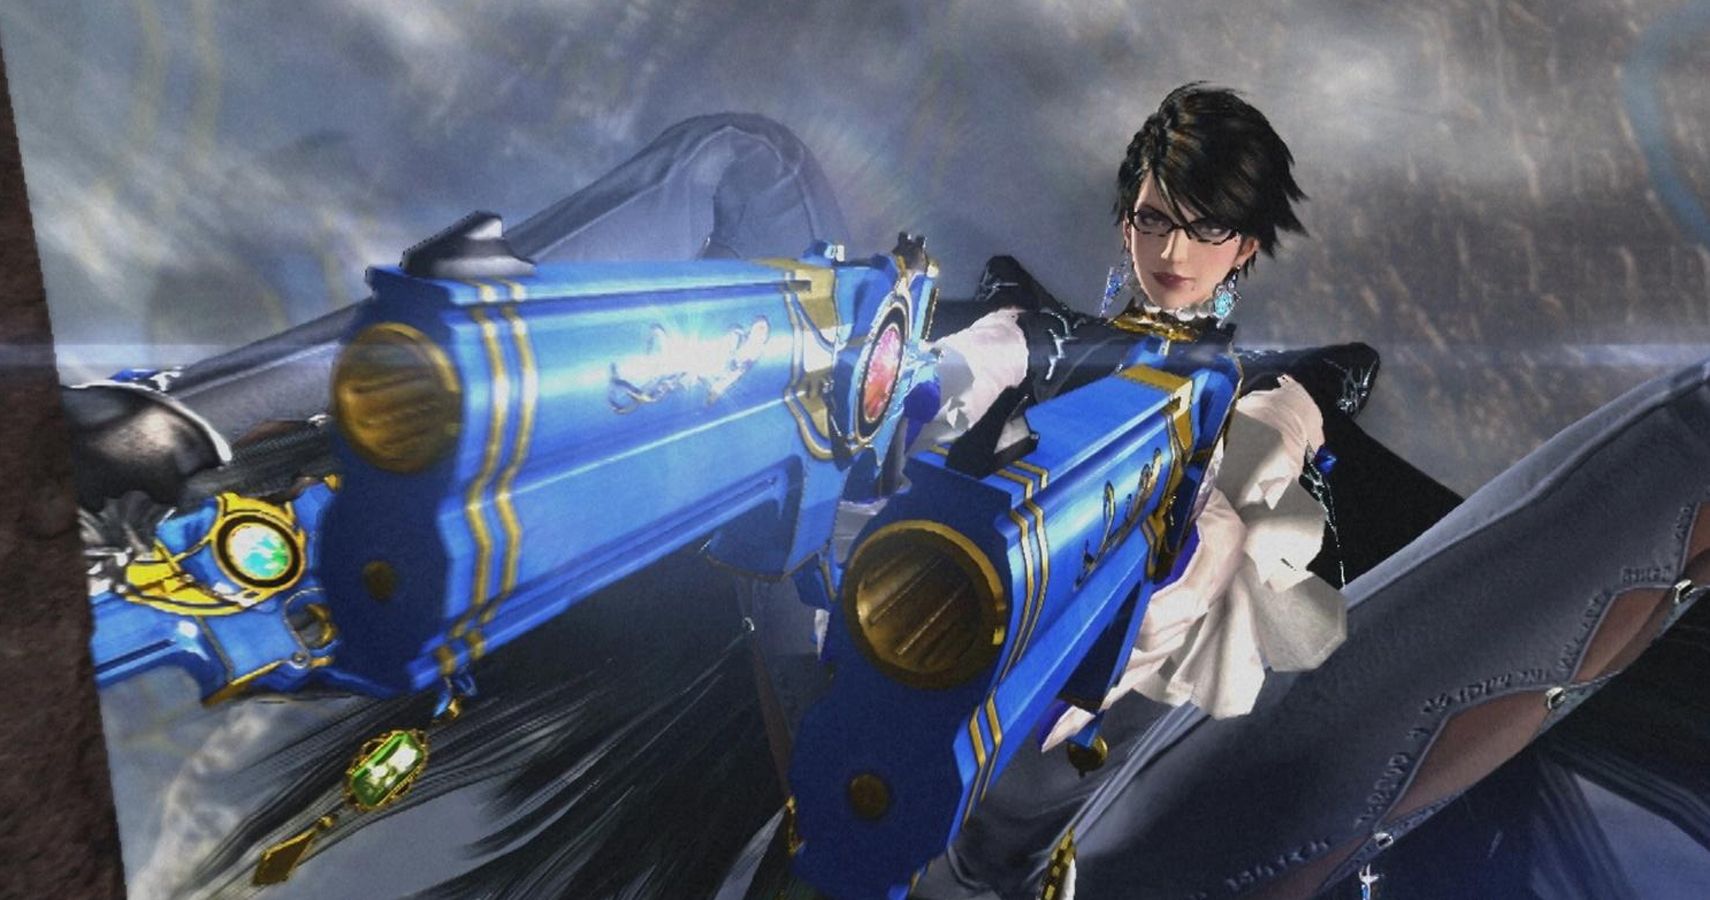 Bayonetta Devs Working On Game To Turn The Action Genre On Its Head